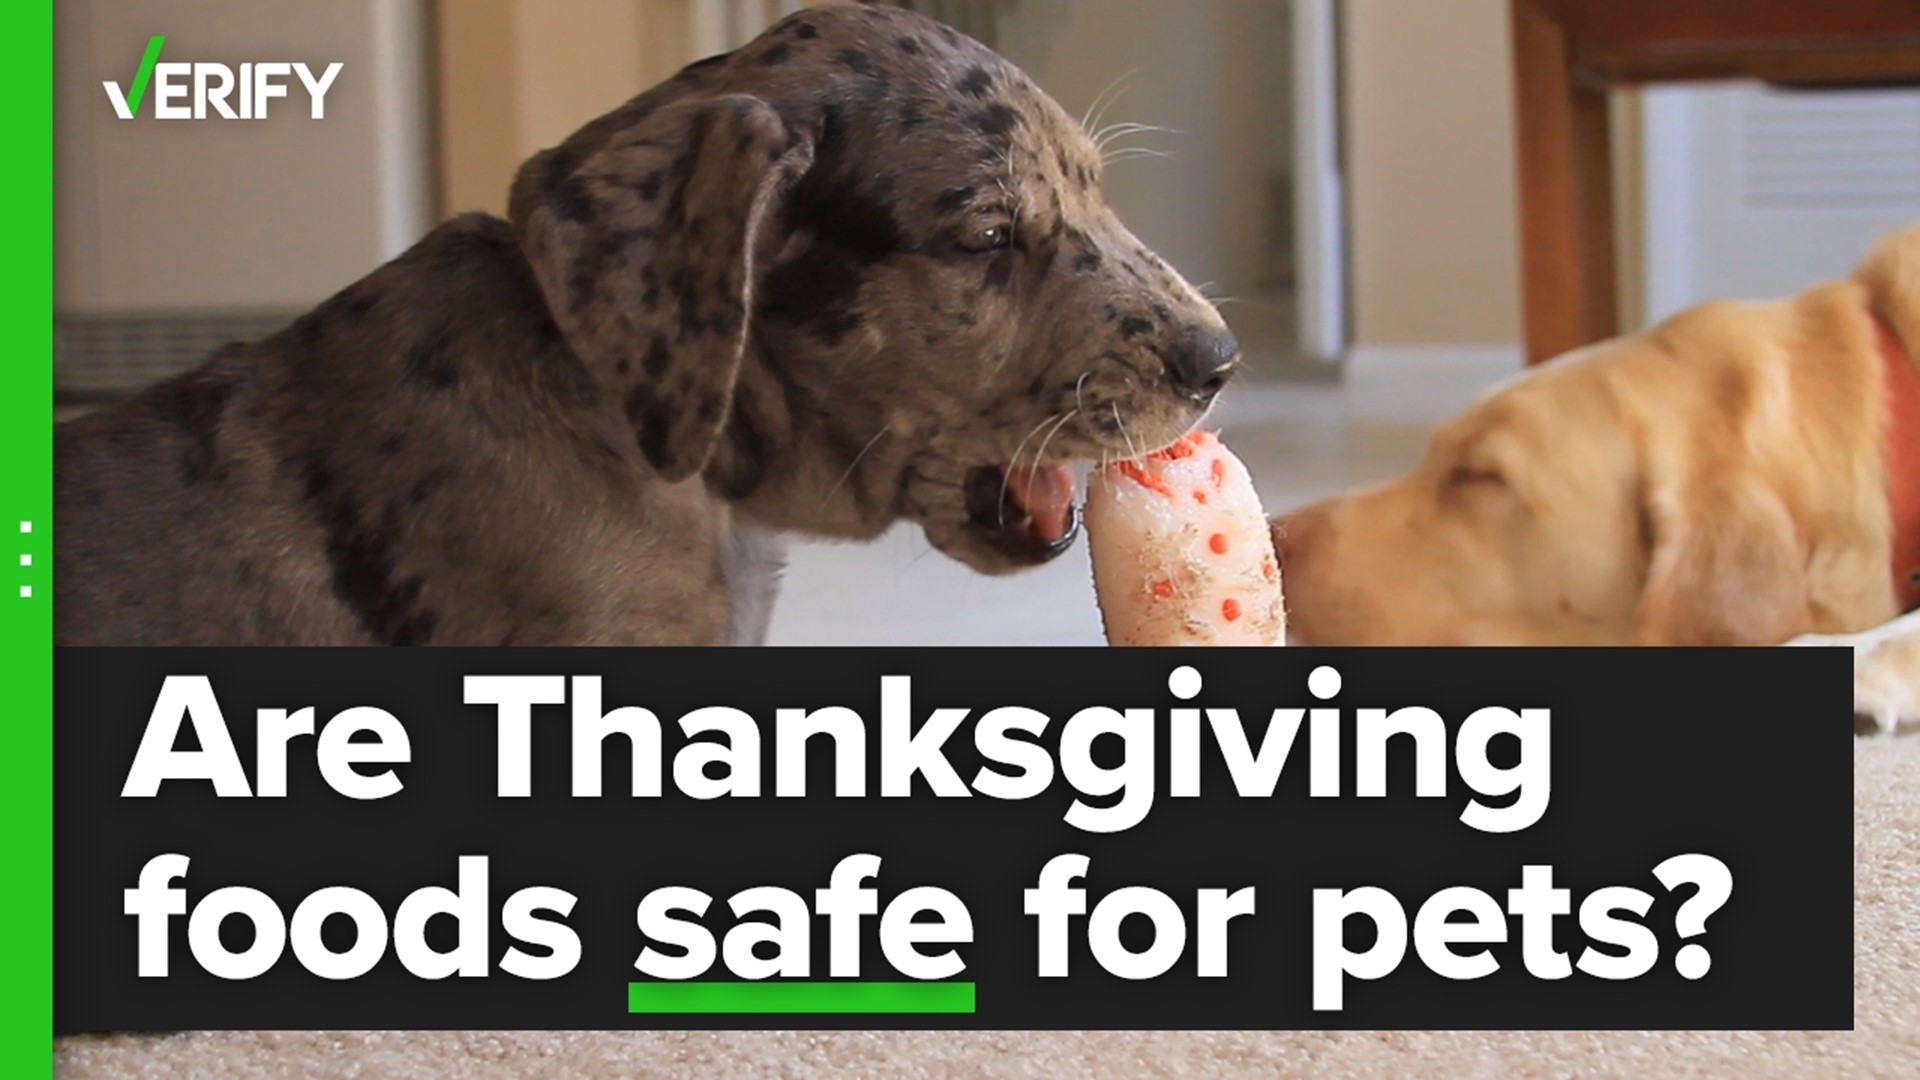 Did you know that many popular Thanksgiving foods are not safe for pets? The VERIFY team looks into what foods are and aren’t safe for your pets to eat this holiday.